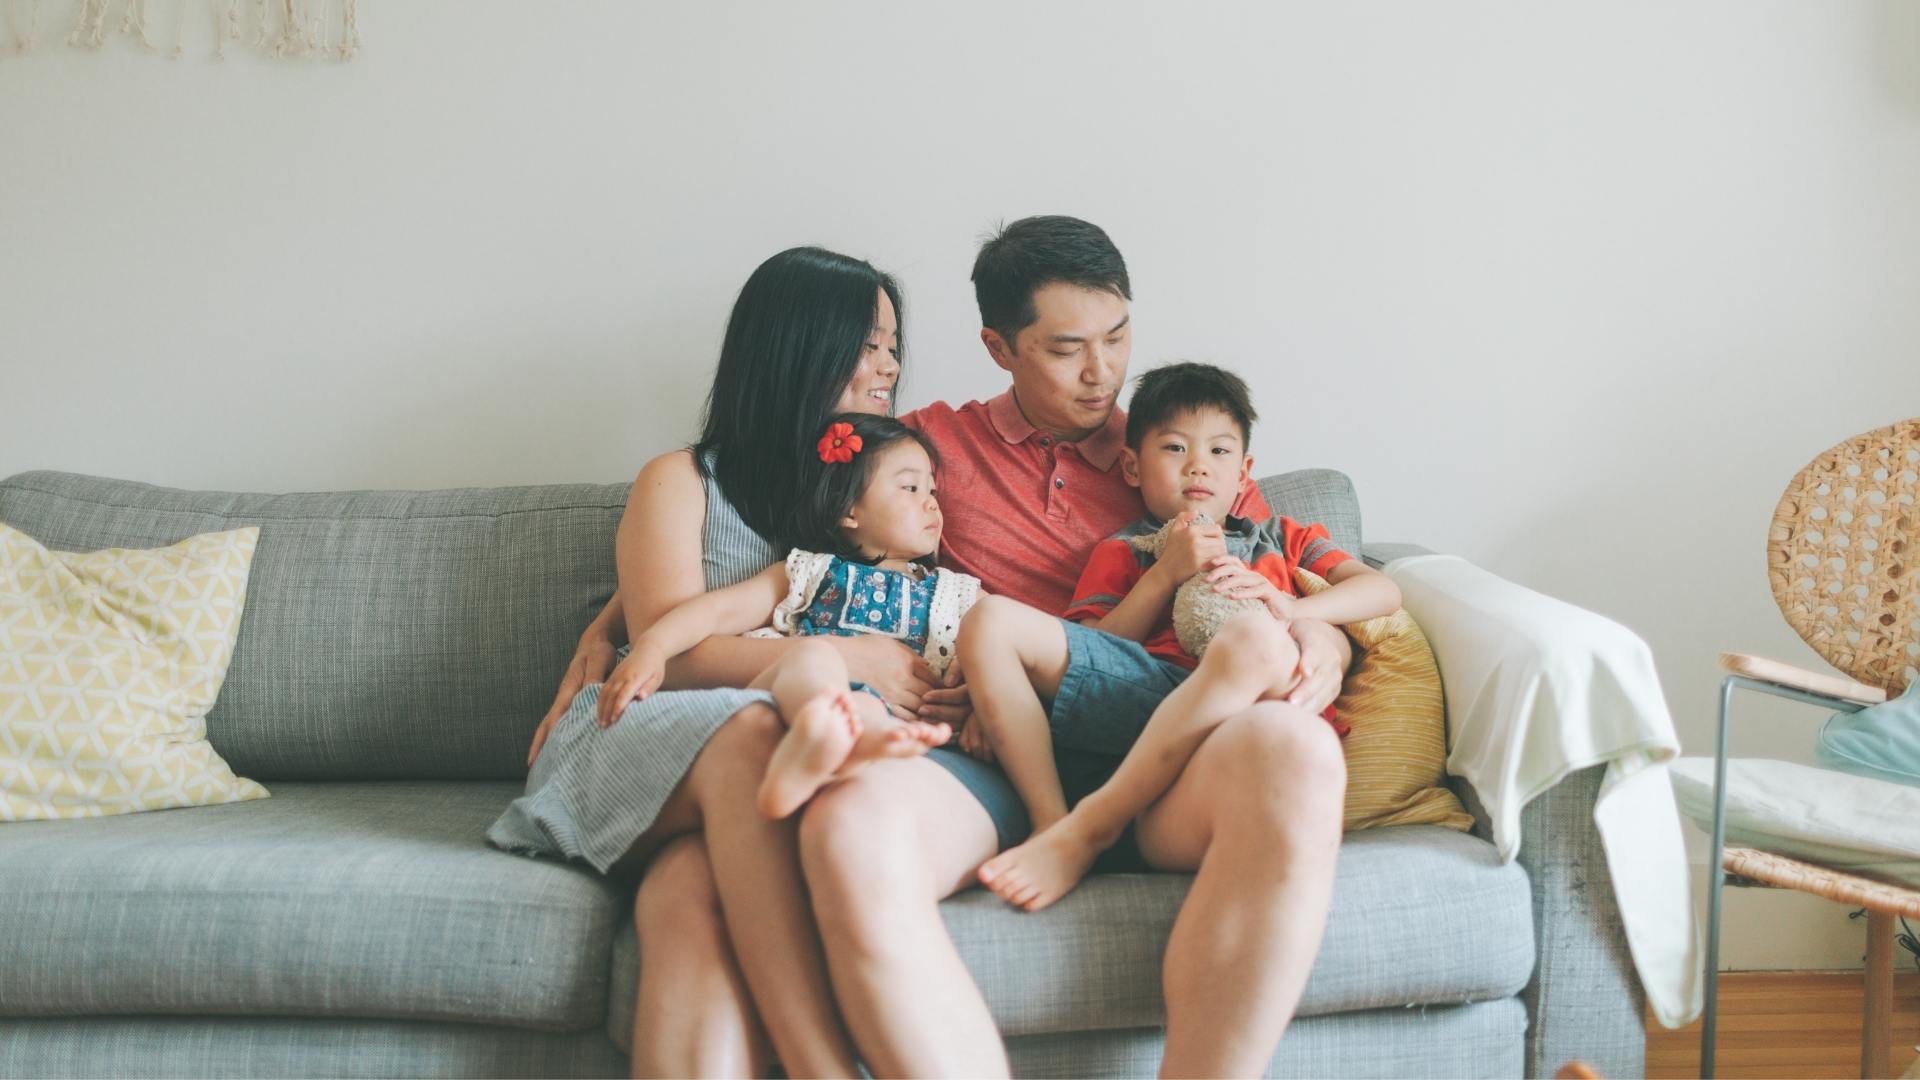 Asian american couple sitting on grey couch each with a child on their lap approximately 4-6 years of age